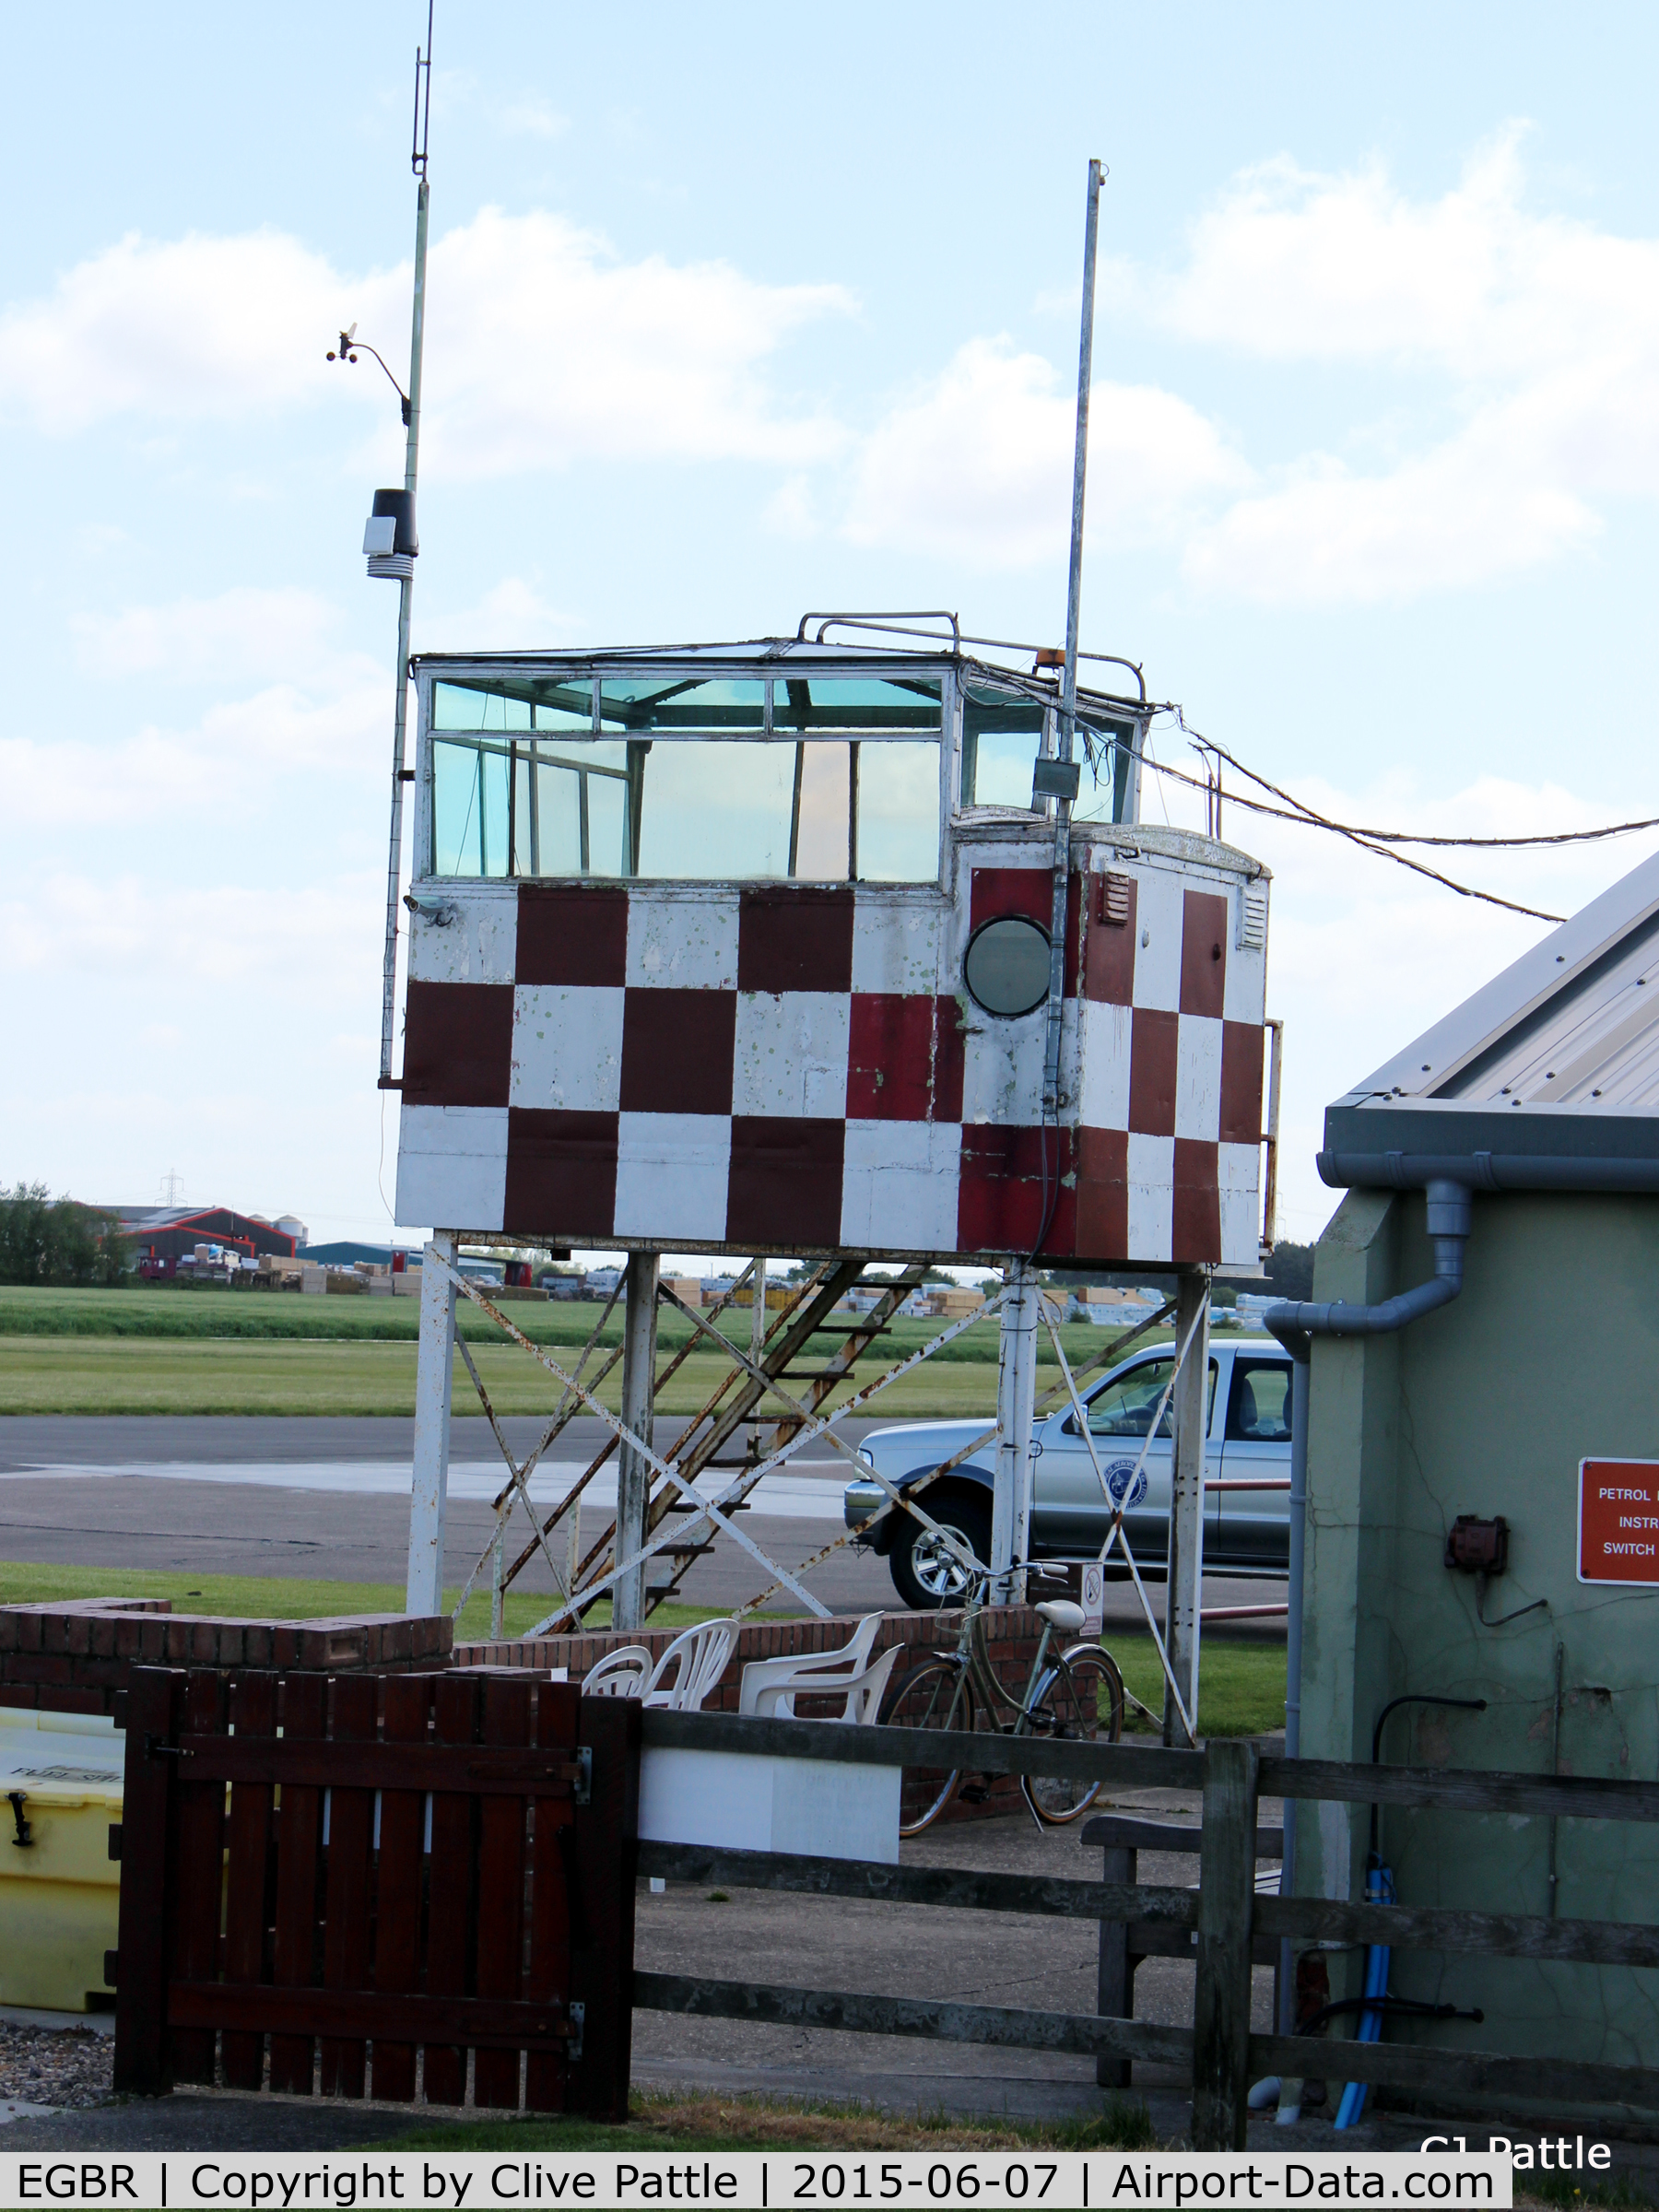 EGBR Airport - A view of the tower facilities at Breighton Airfield, Yorkshire - EGBR